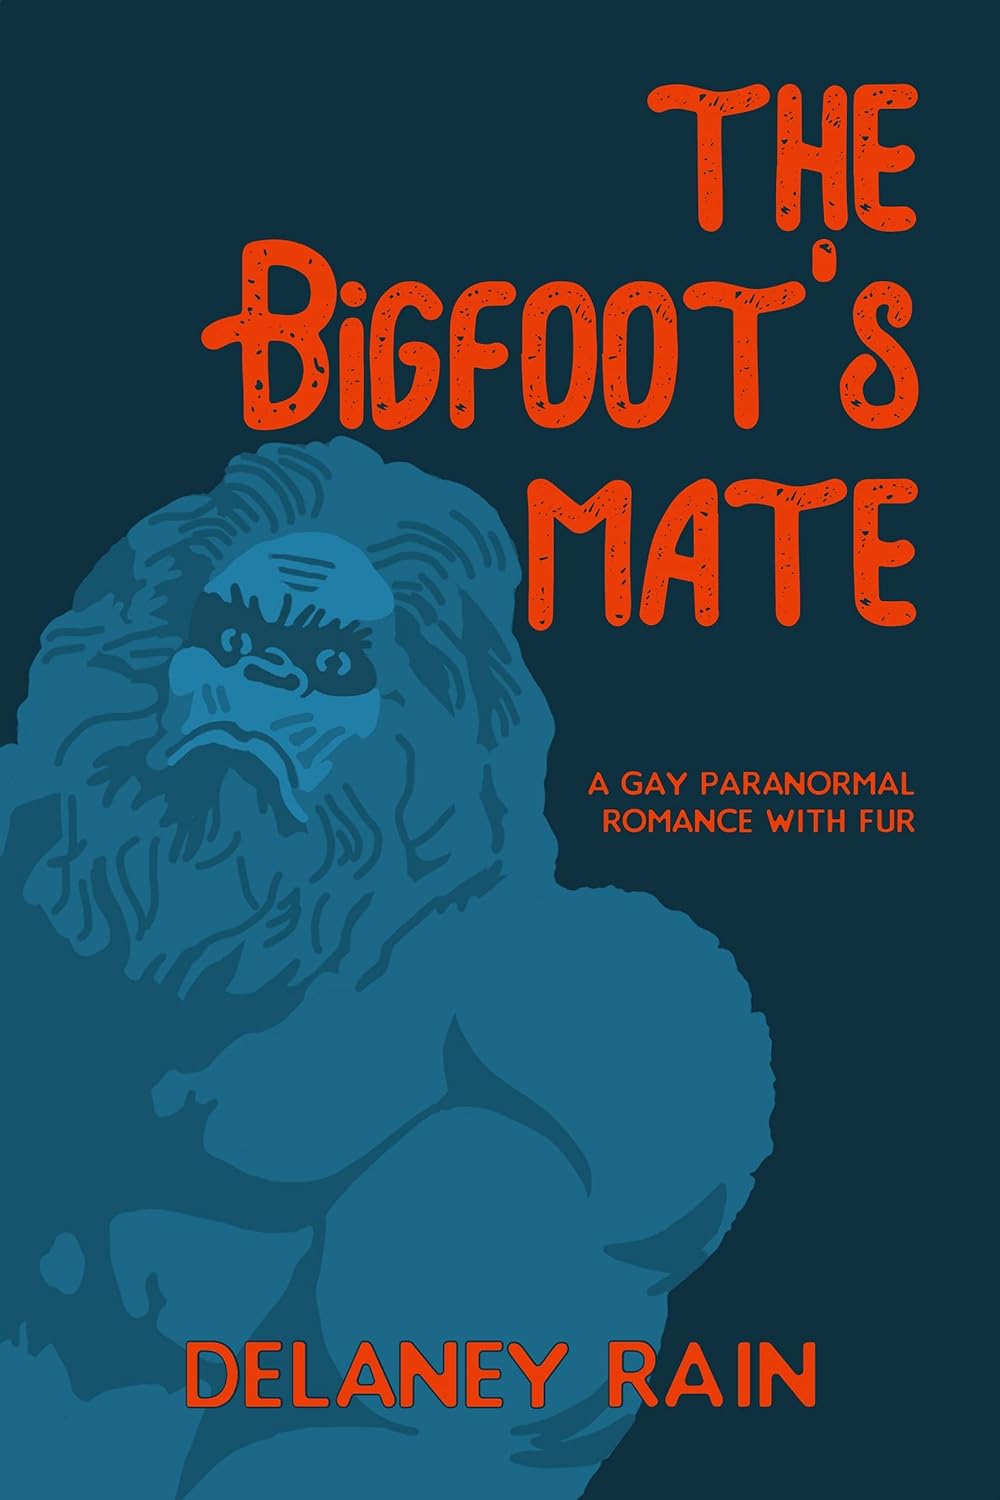 The Bigfoot’s Mate by Delaney Rain